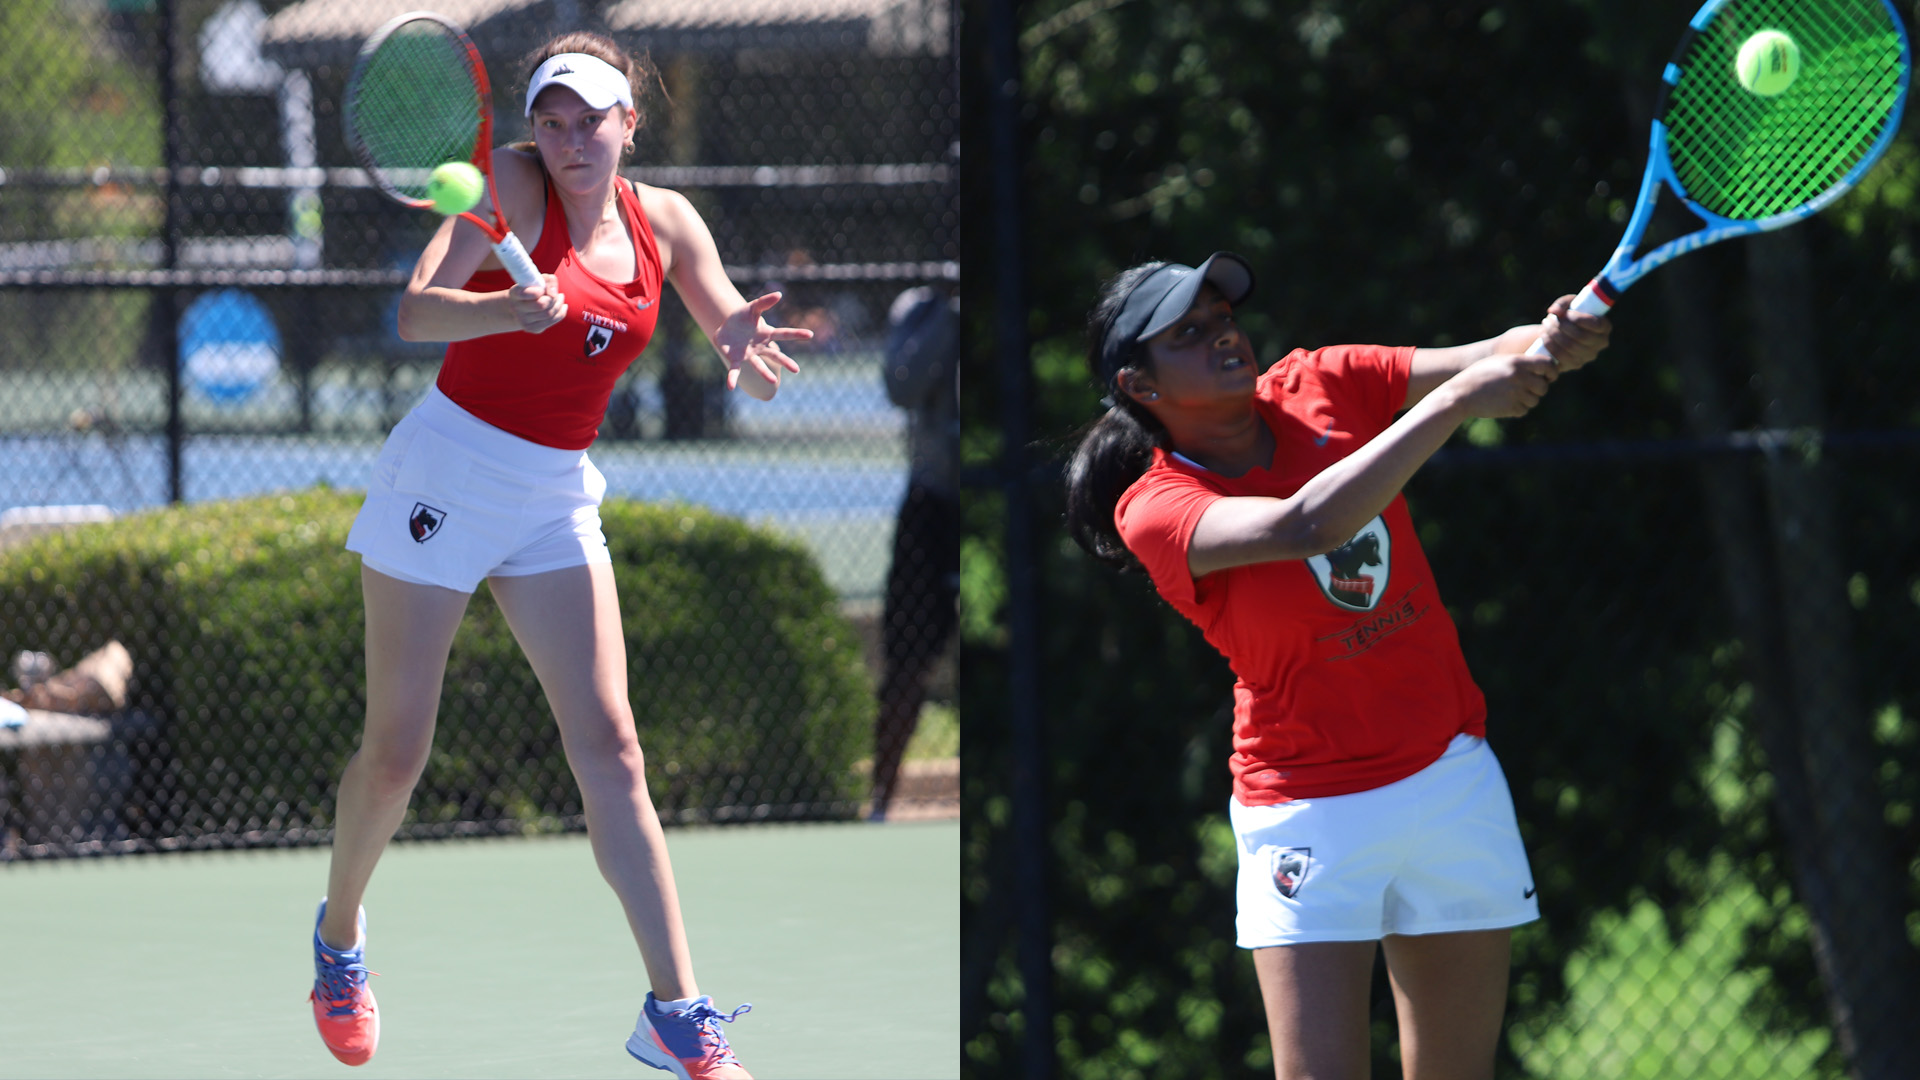 split image of two women's tennis players wearing red shirts and white shorts hitting a ball